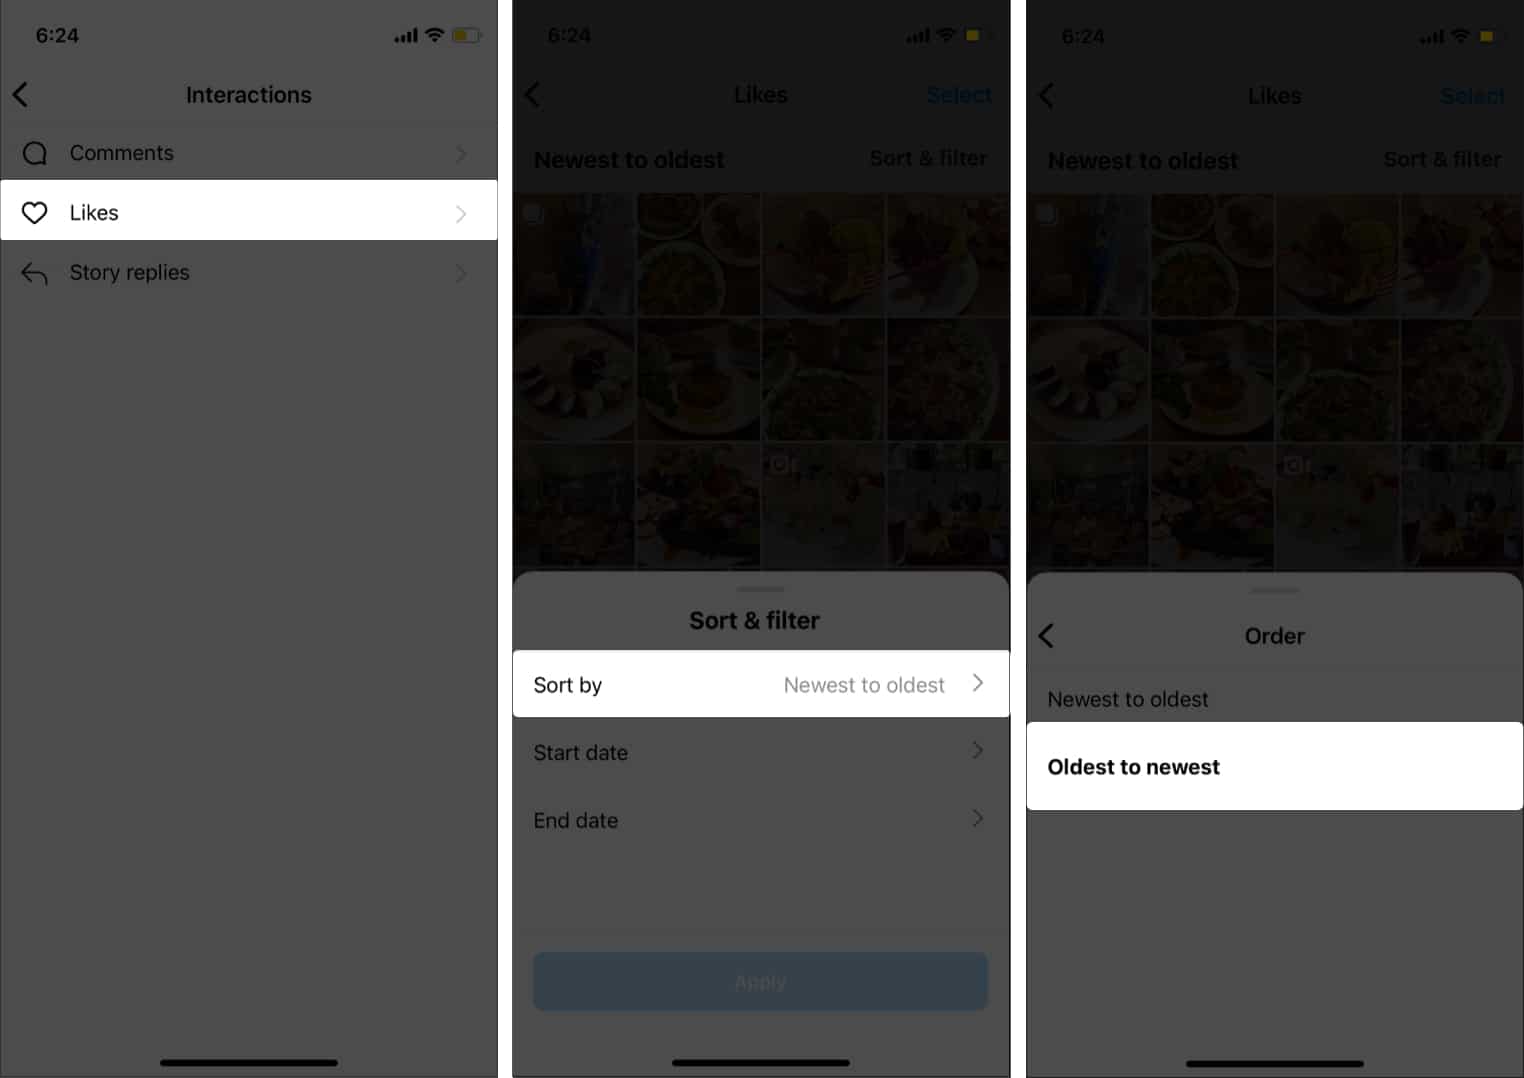 Select Oldest to newest from Instagram Settings